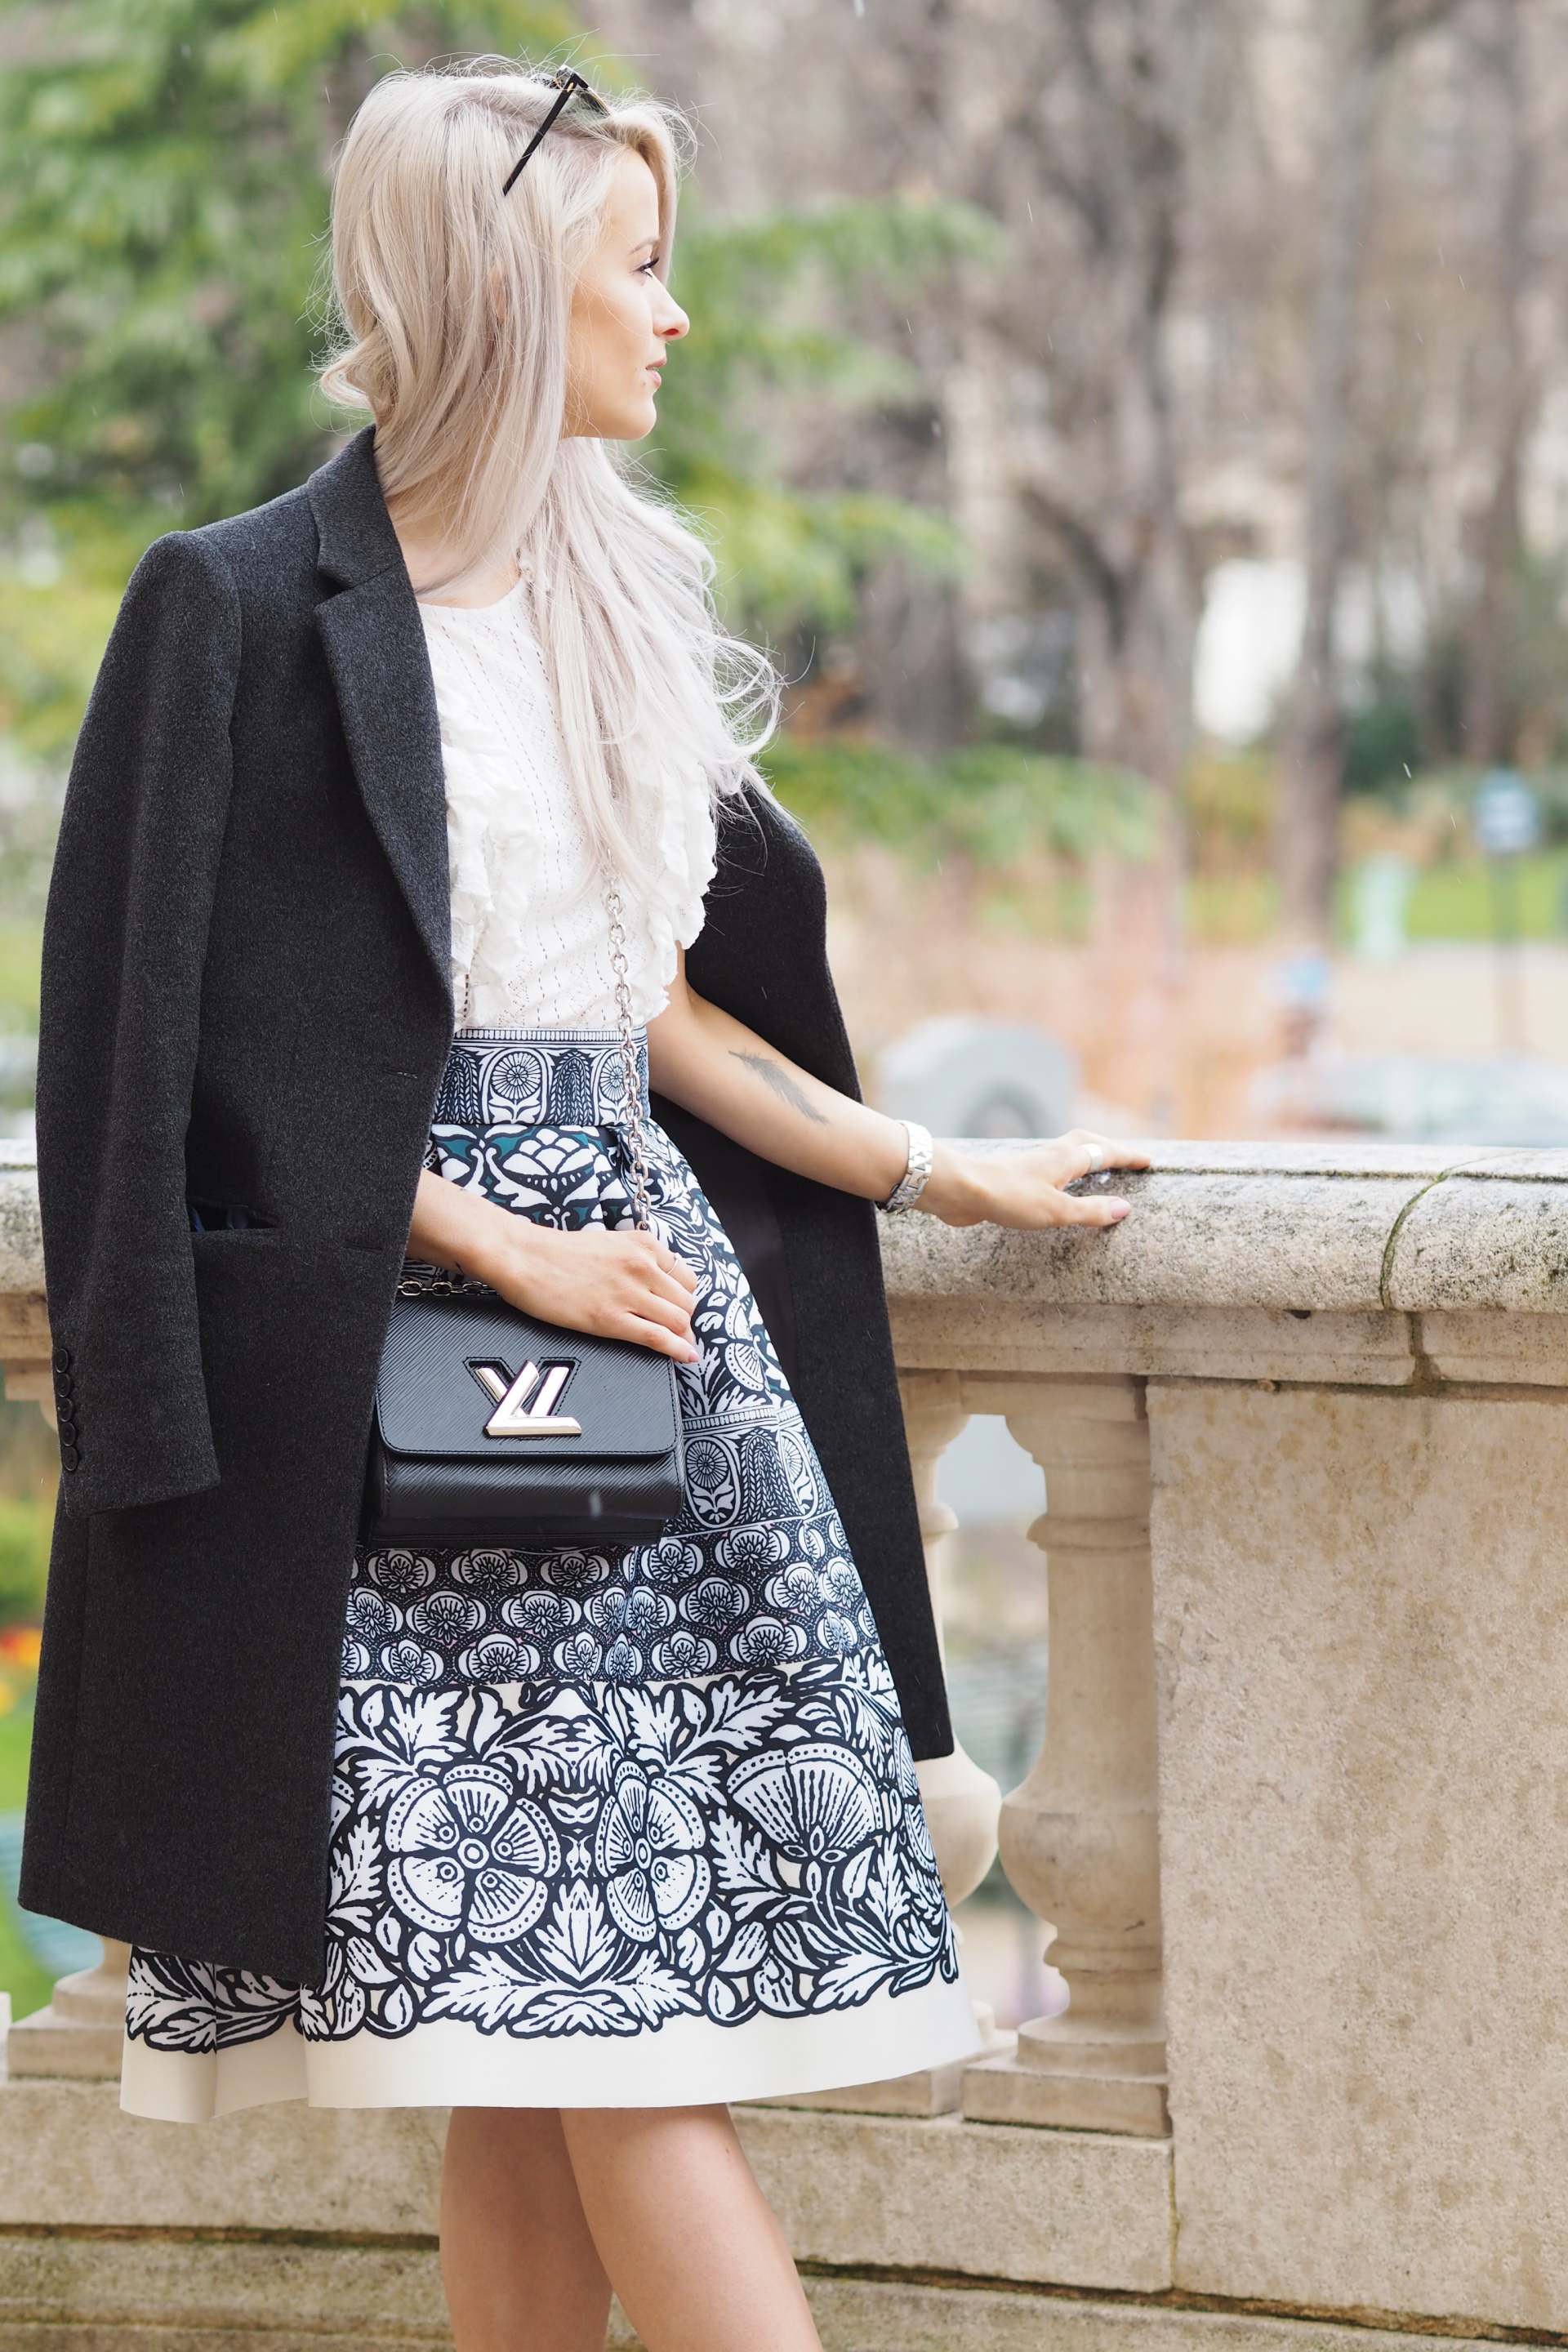 inthefrow gianvito rossi caged heels in turquoise, louis vuitton twist bag in black, maje skirt, joseph grey jacket